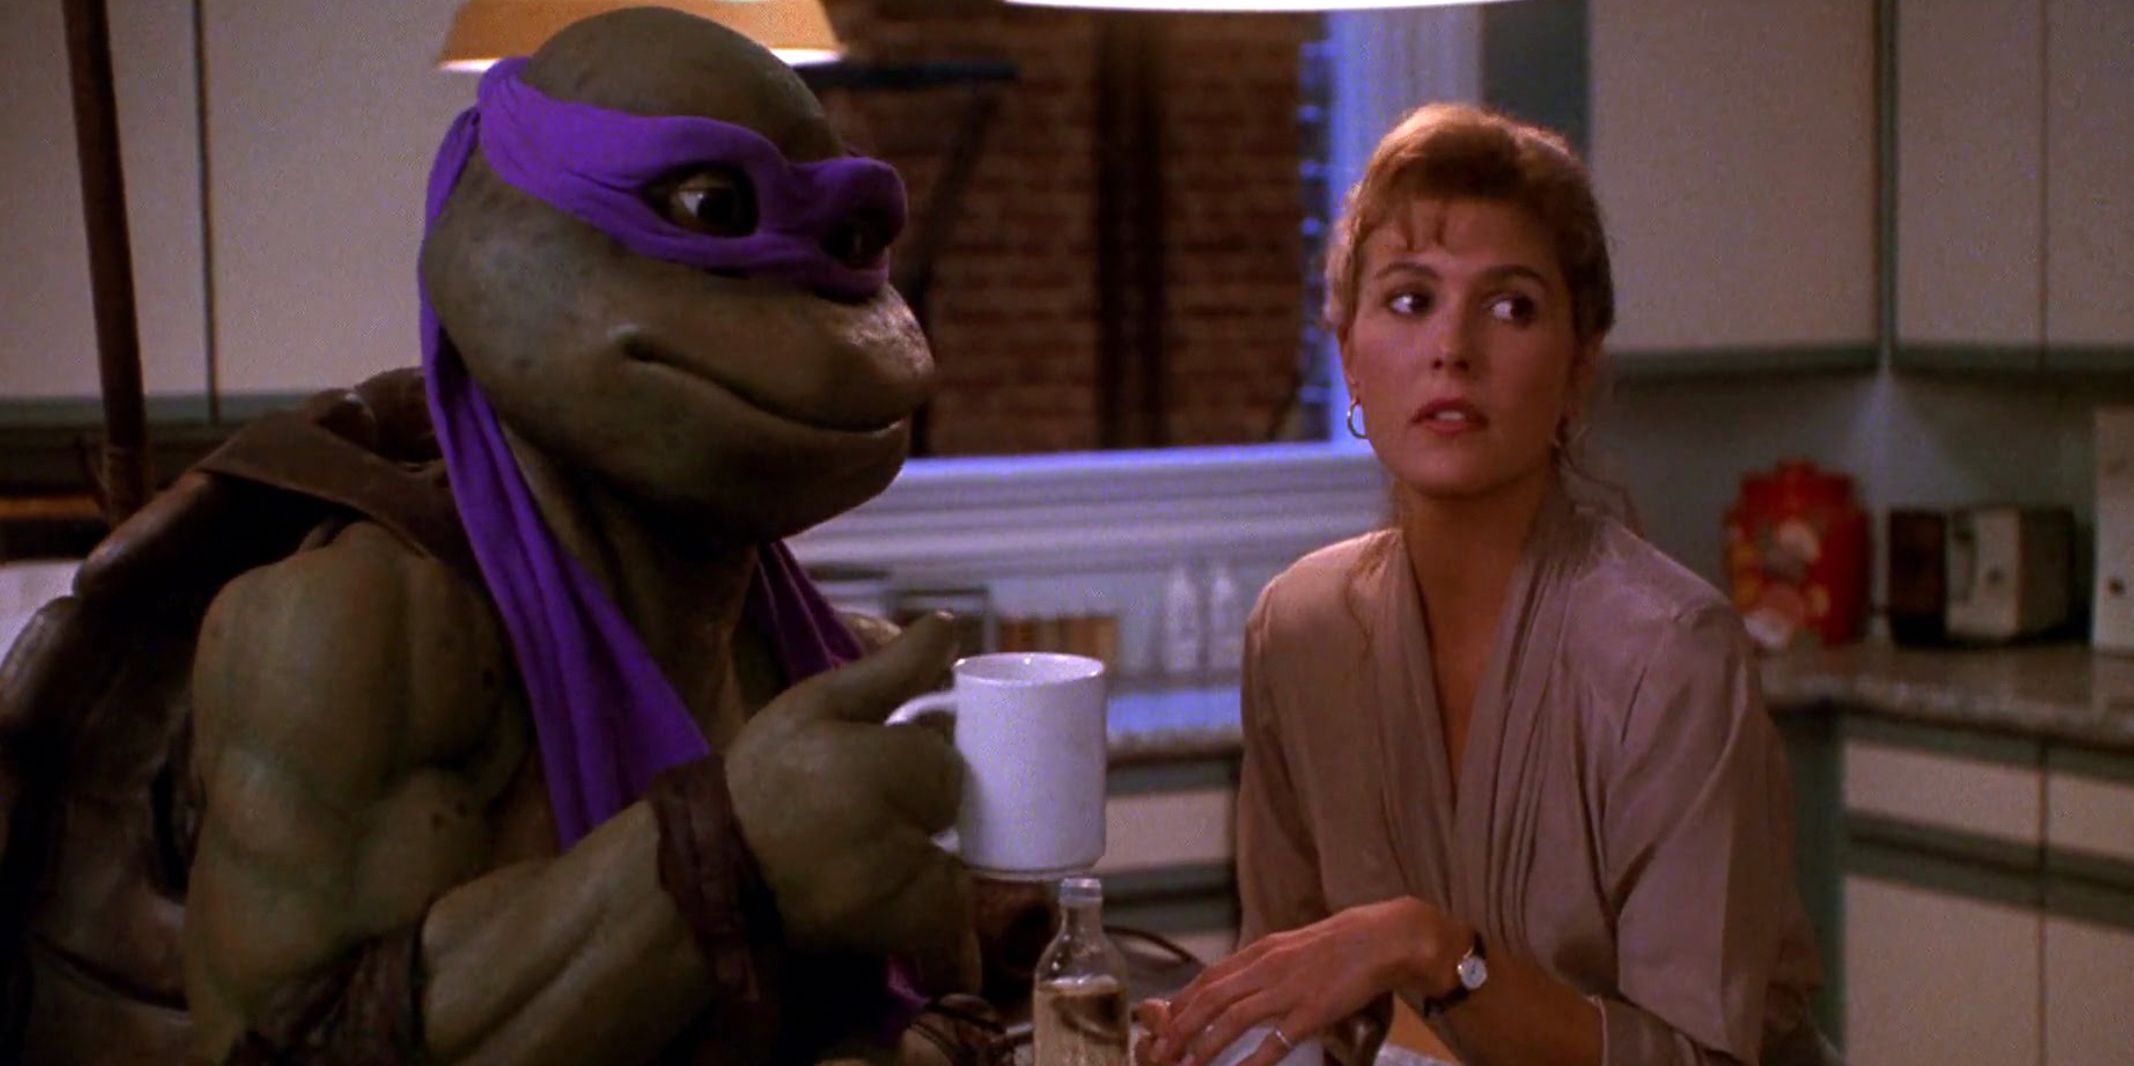 Donatello and April in her kitchen in Teenage Mutant Ninja Turtles The Secret Of The Ooze